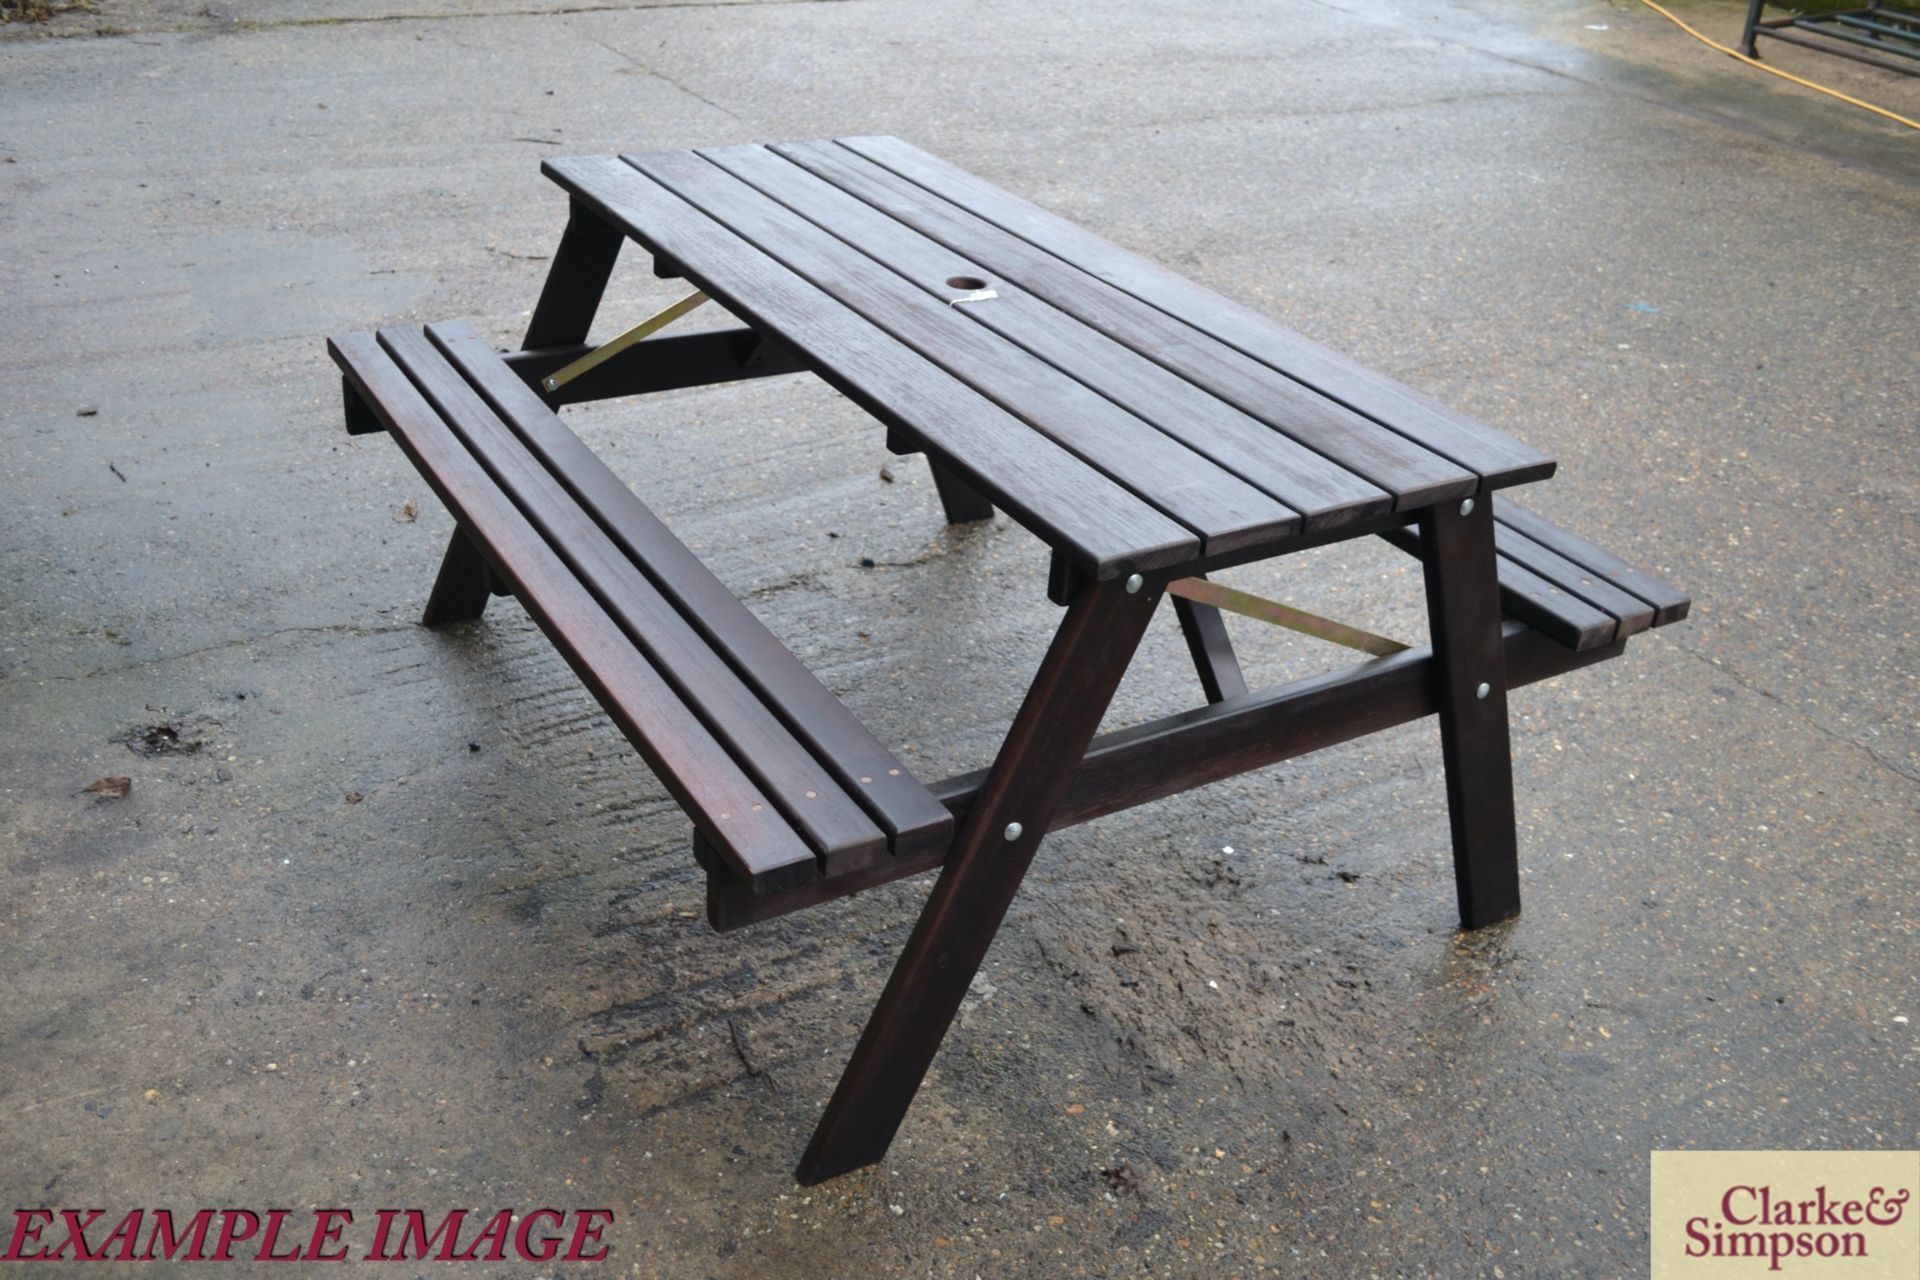 10x stained Eucalyptus 1.5m 6 seater picnic bench. - Image 5 of 6